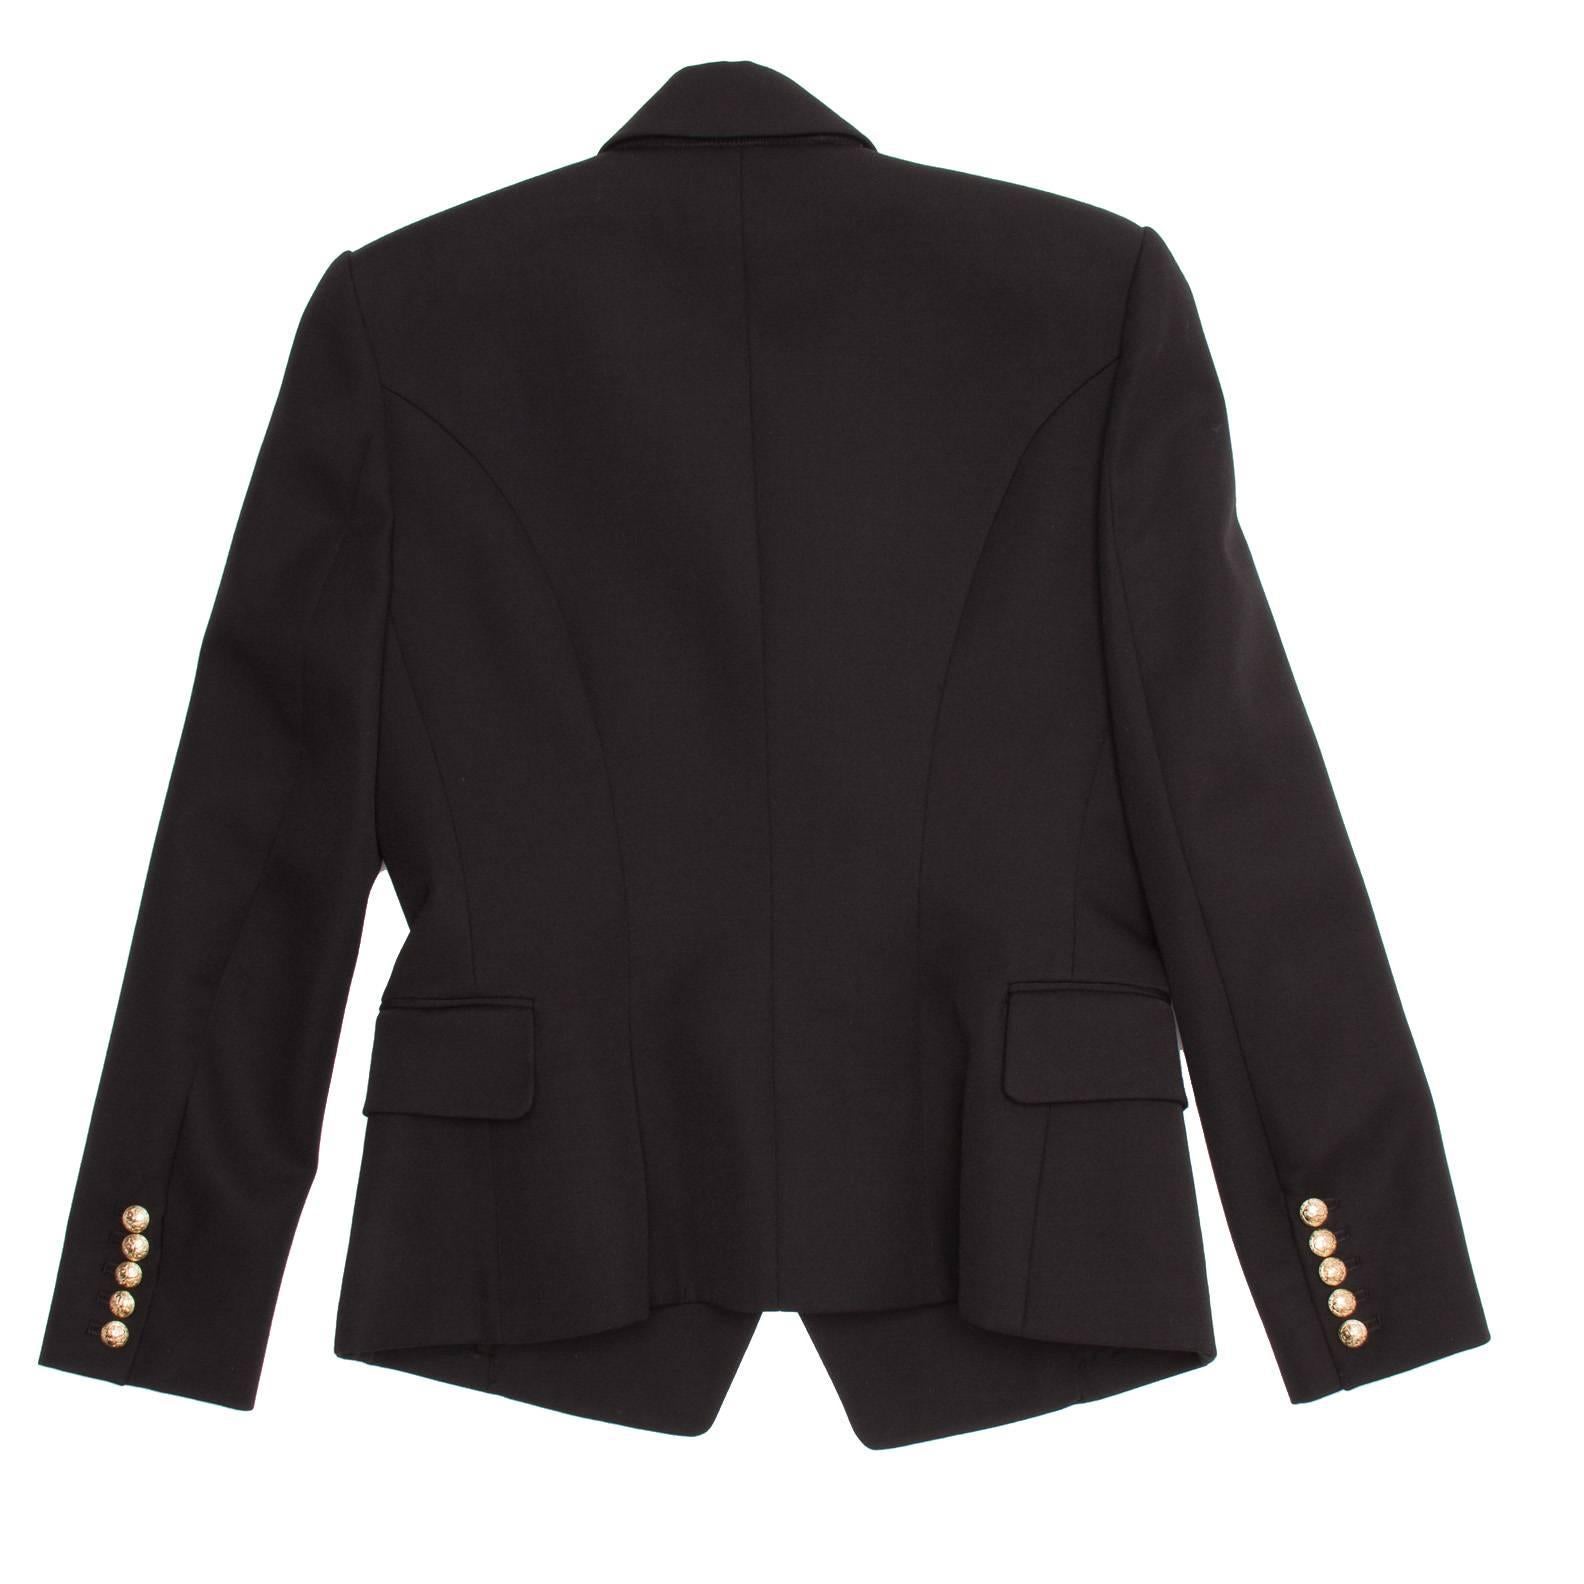 Balmain Black Wool Double Breasted Jacket In New Condition For Sale In Brooklyn, NY